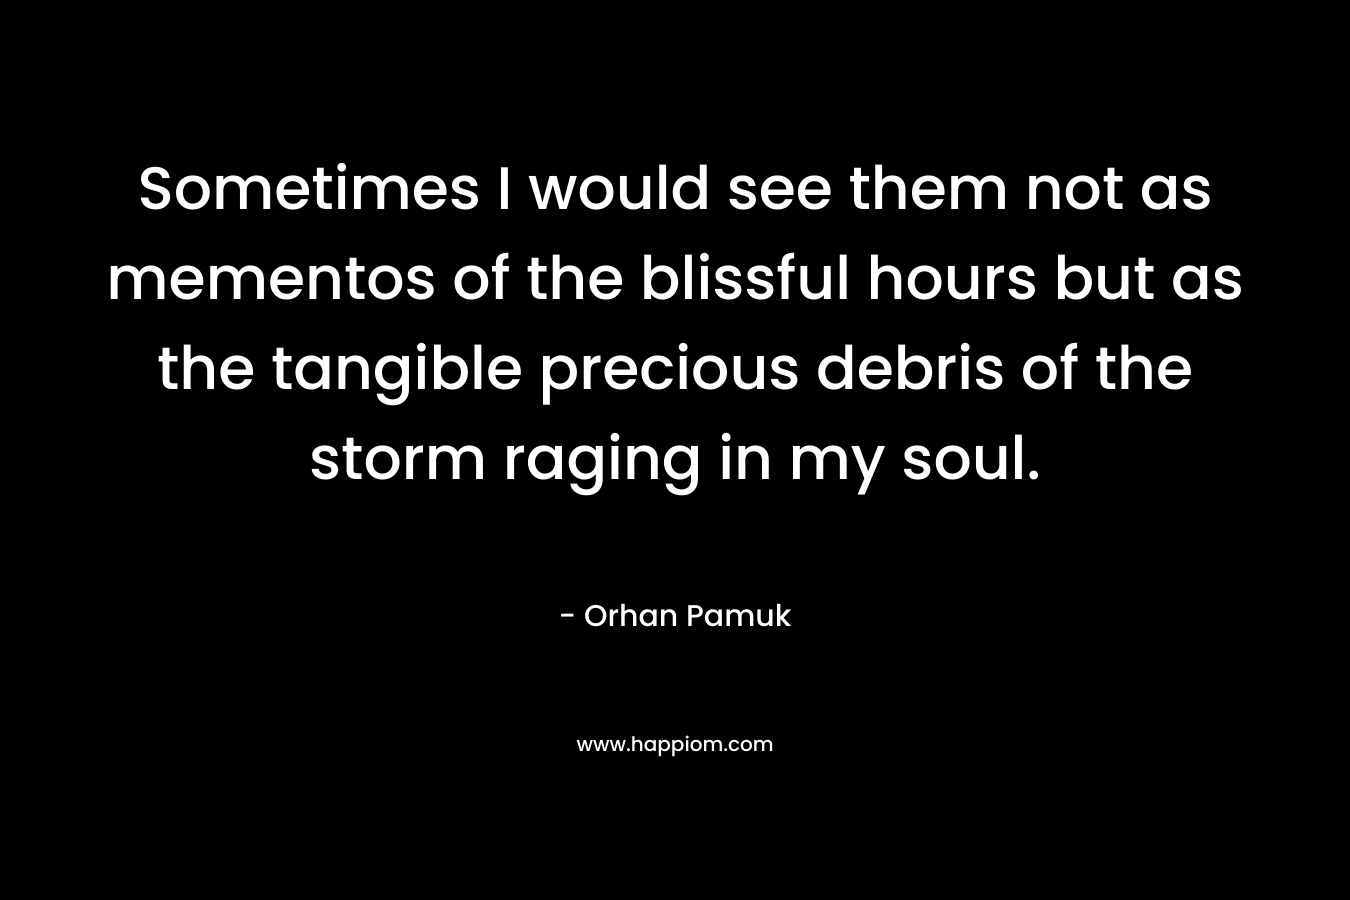 Sometimes I would see them not as mementos of the blissful hours but as the tangible precious debris of the storm raging in my soul. – Orhan Pamuk